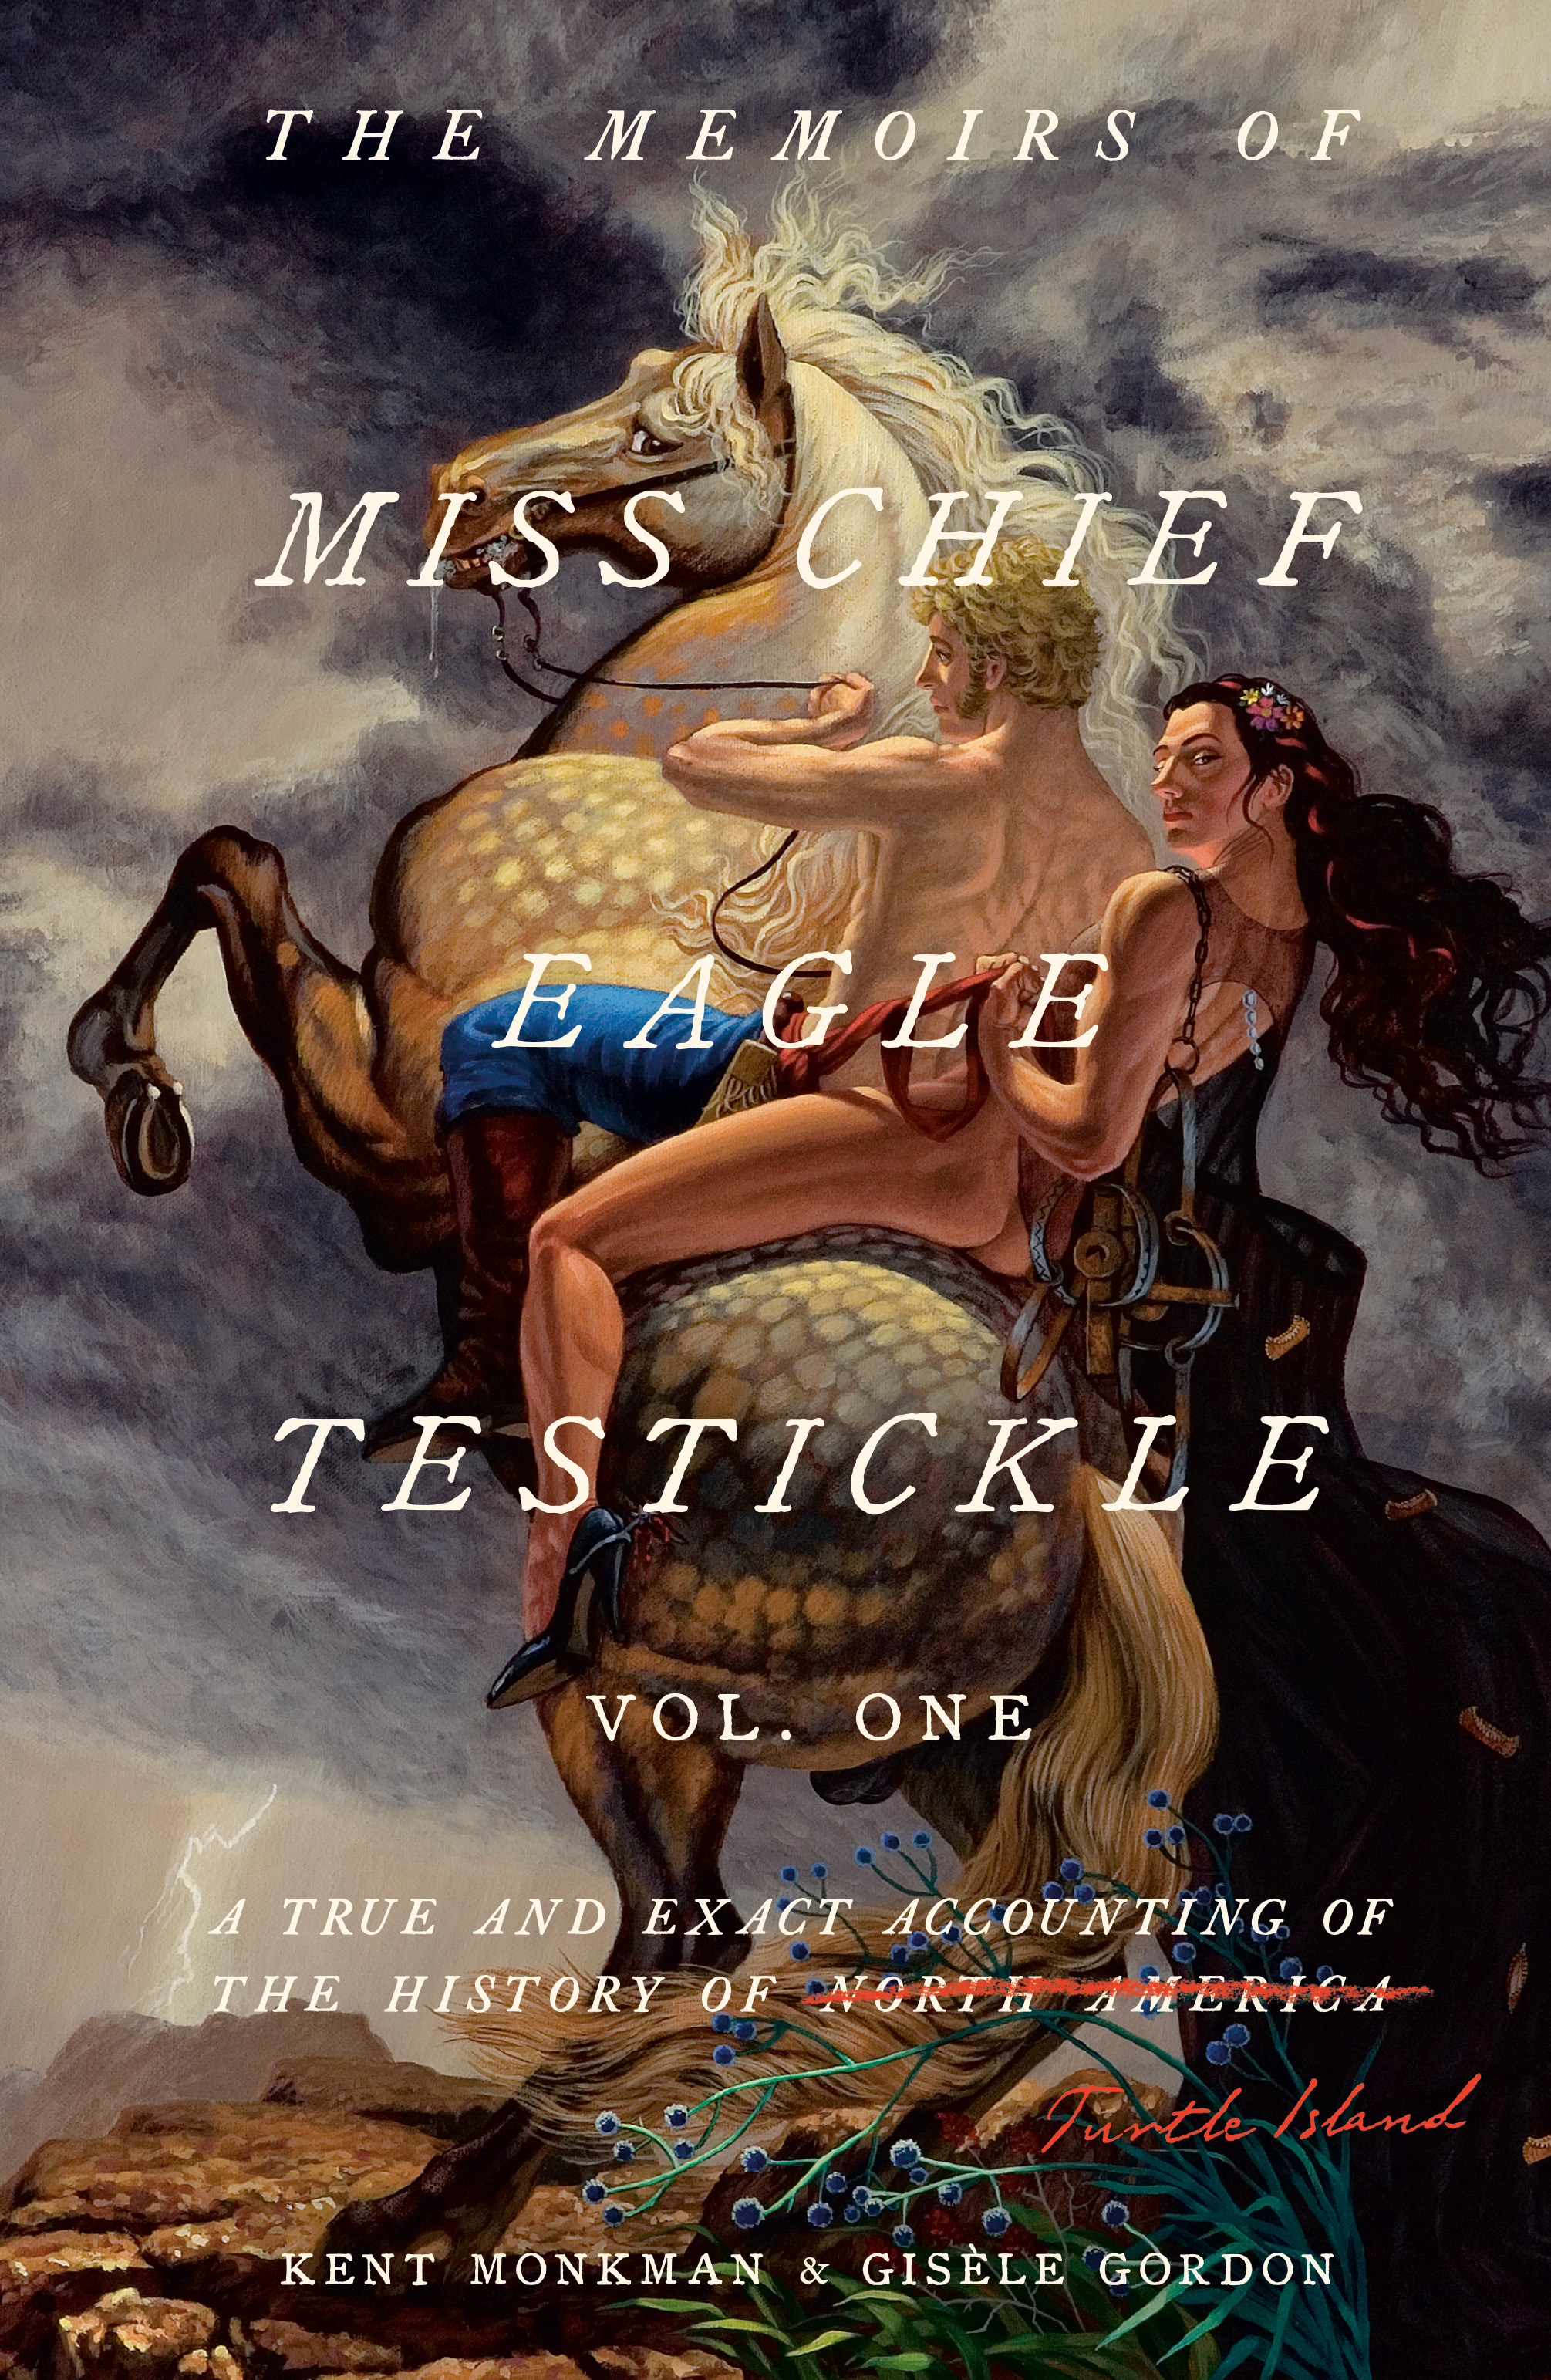 The Memoirs of Miss Chief Eagle Testickle: Vol. 1 : A True and Exact Accounting of the History of Turtle Island | Monkman, Kent (Auteur) | Gordon, Gisèle (Auteur)